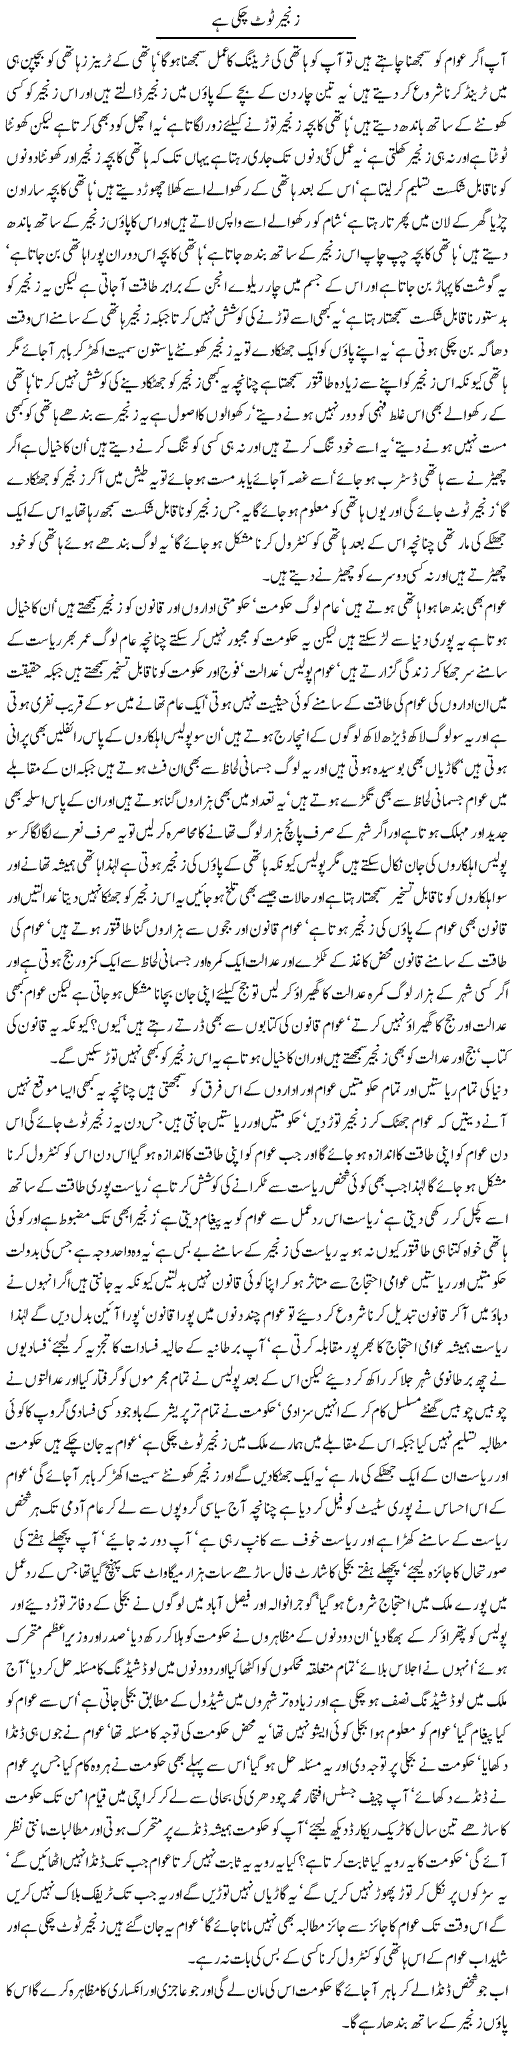 Wake Up Public Express Column Javed Chaudhry 11 October 2011